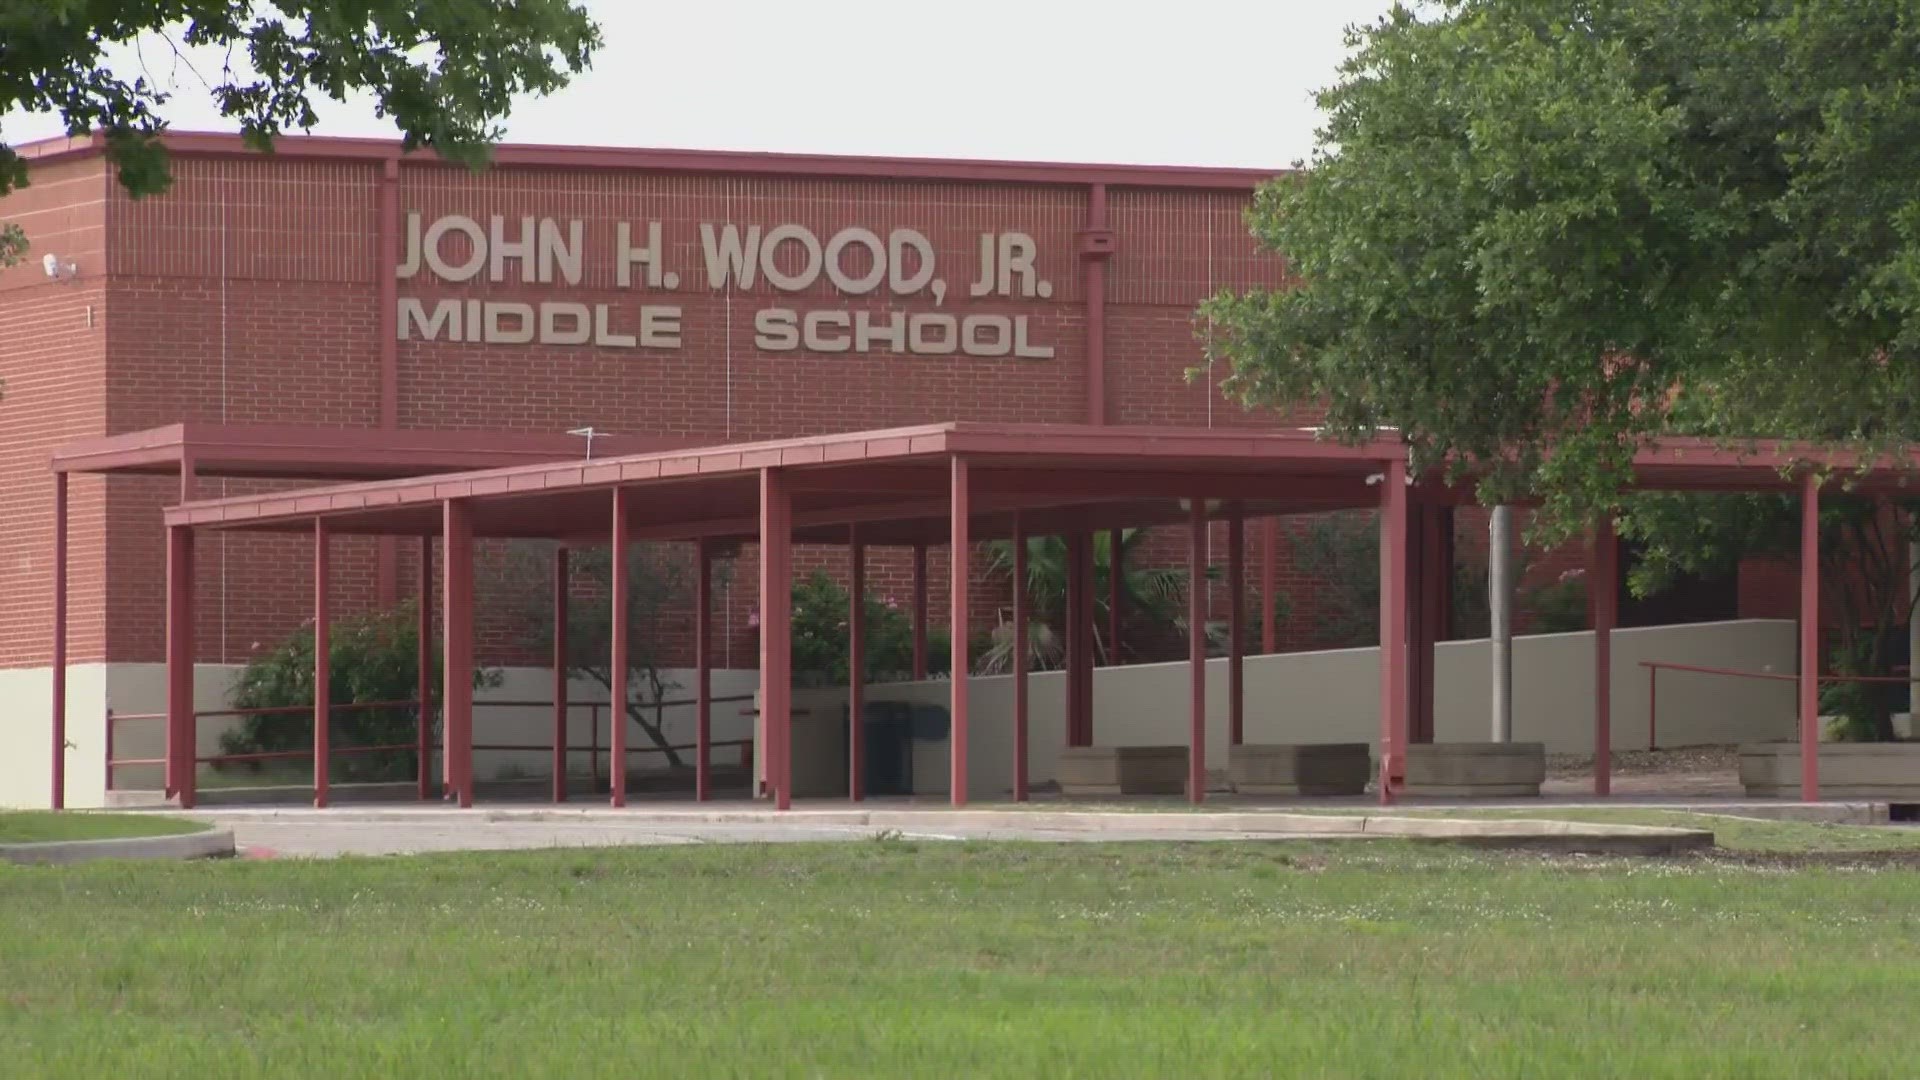 The middle school teacher was conducting active shooter training on her own without authorization, the principal says.